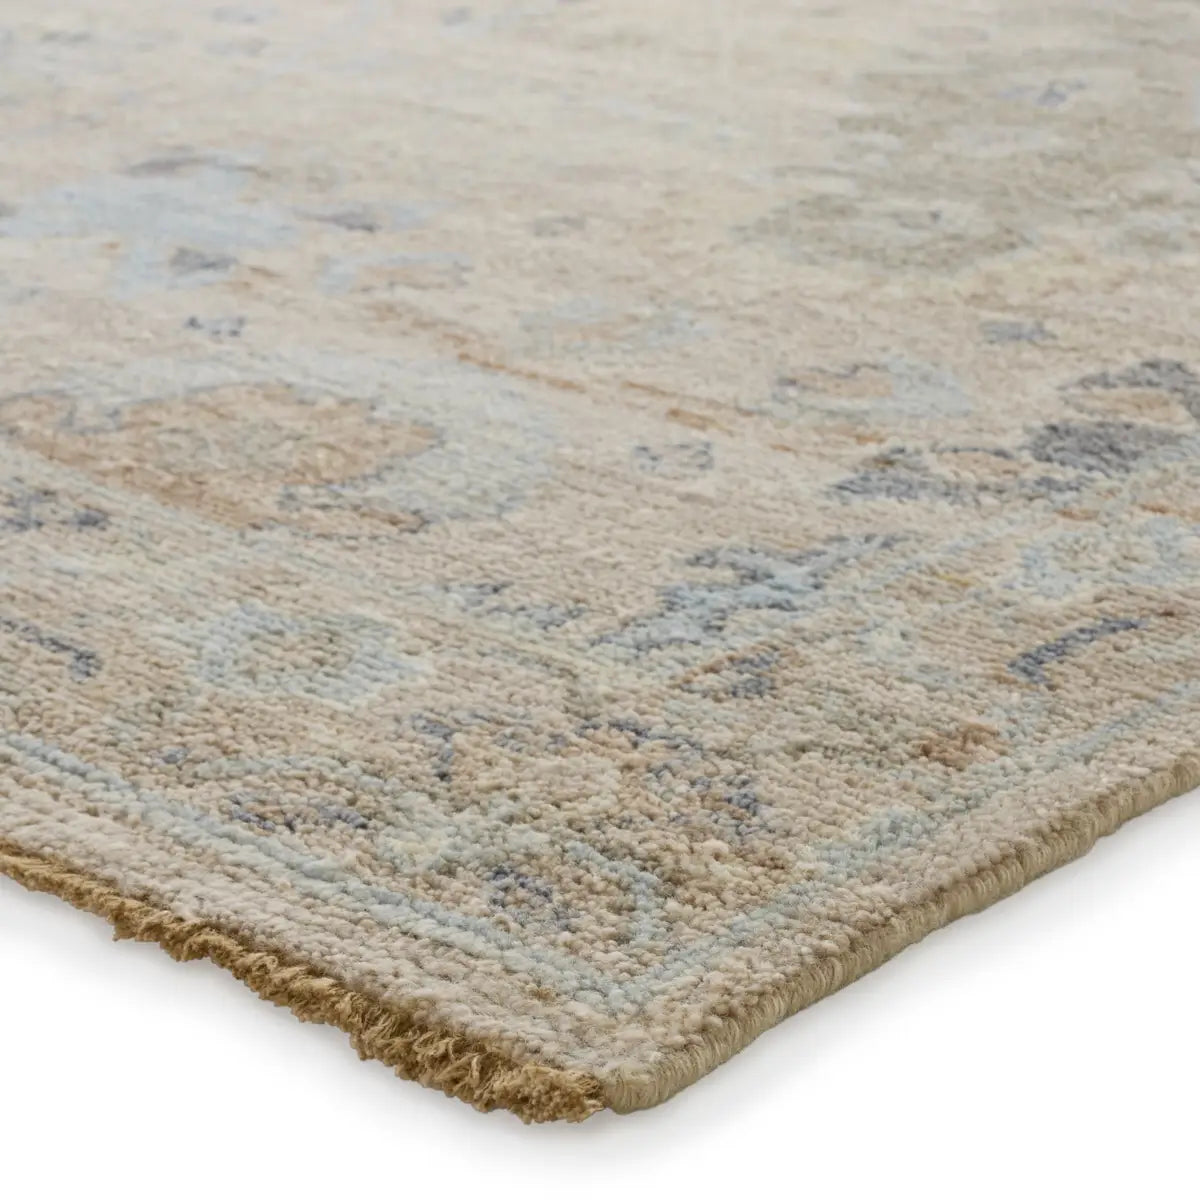 The Orenda collection features heirloom-quality designs of muted and uniquely updated Old World patterns. The Rivera area rug boasts a beautiful Oriental motif with abstract floral details. Amethyst Home provides interior design services, furniture, rugs, and lighting in the Omaha metro area.